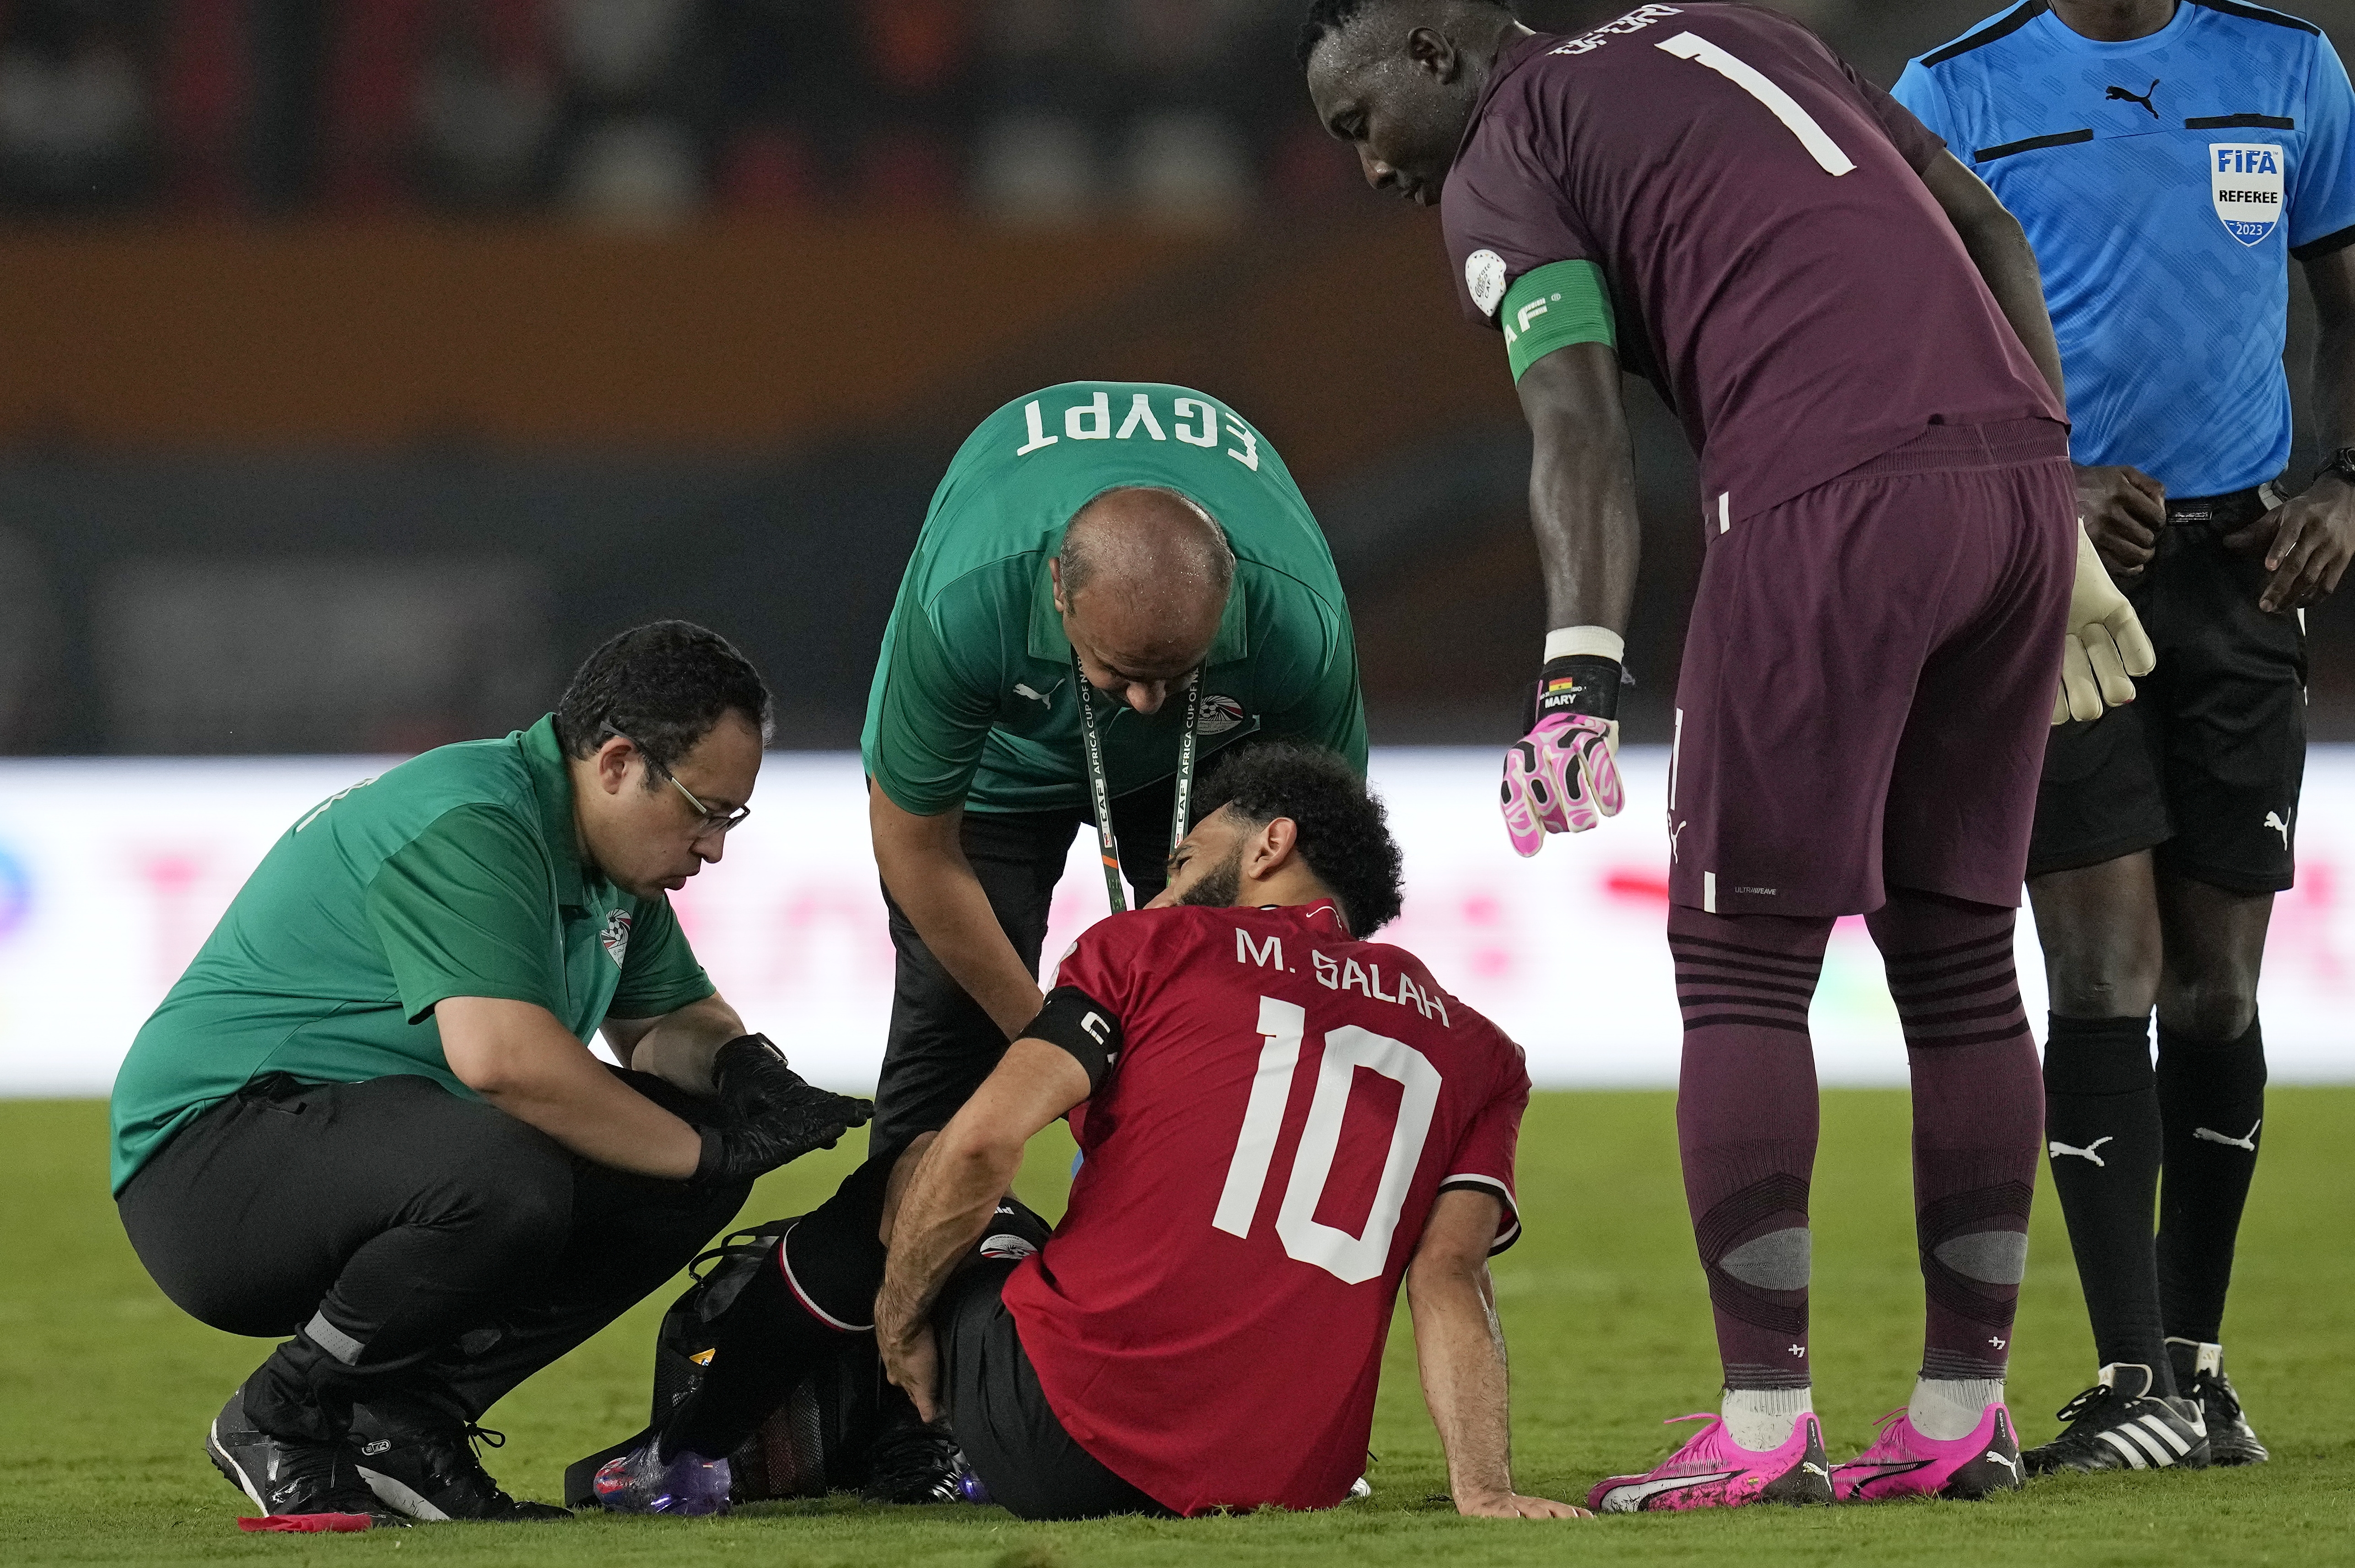 Injury update as Liverpool star Mohamed Salah came off in Egypt's 2-2 draw vs Ghana.